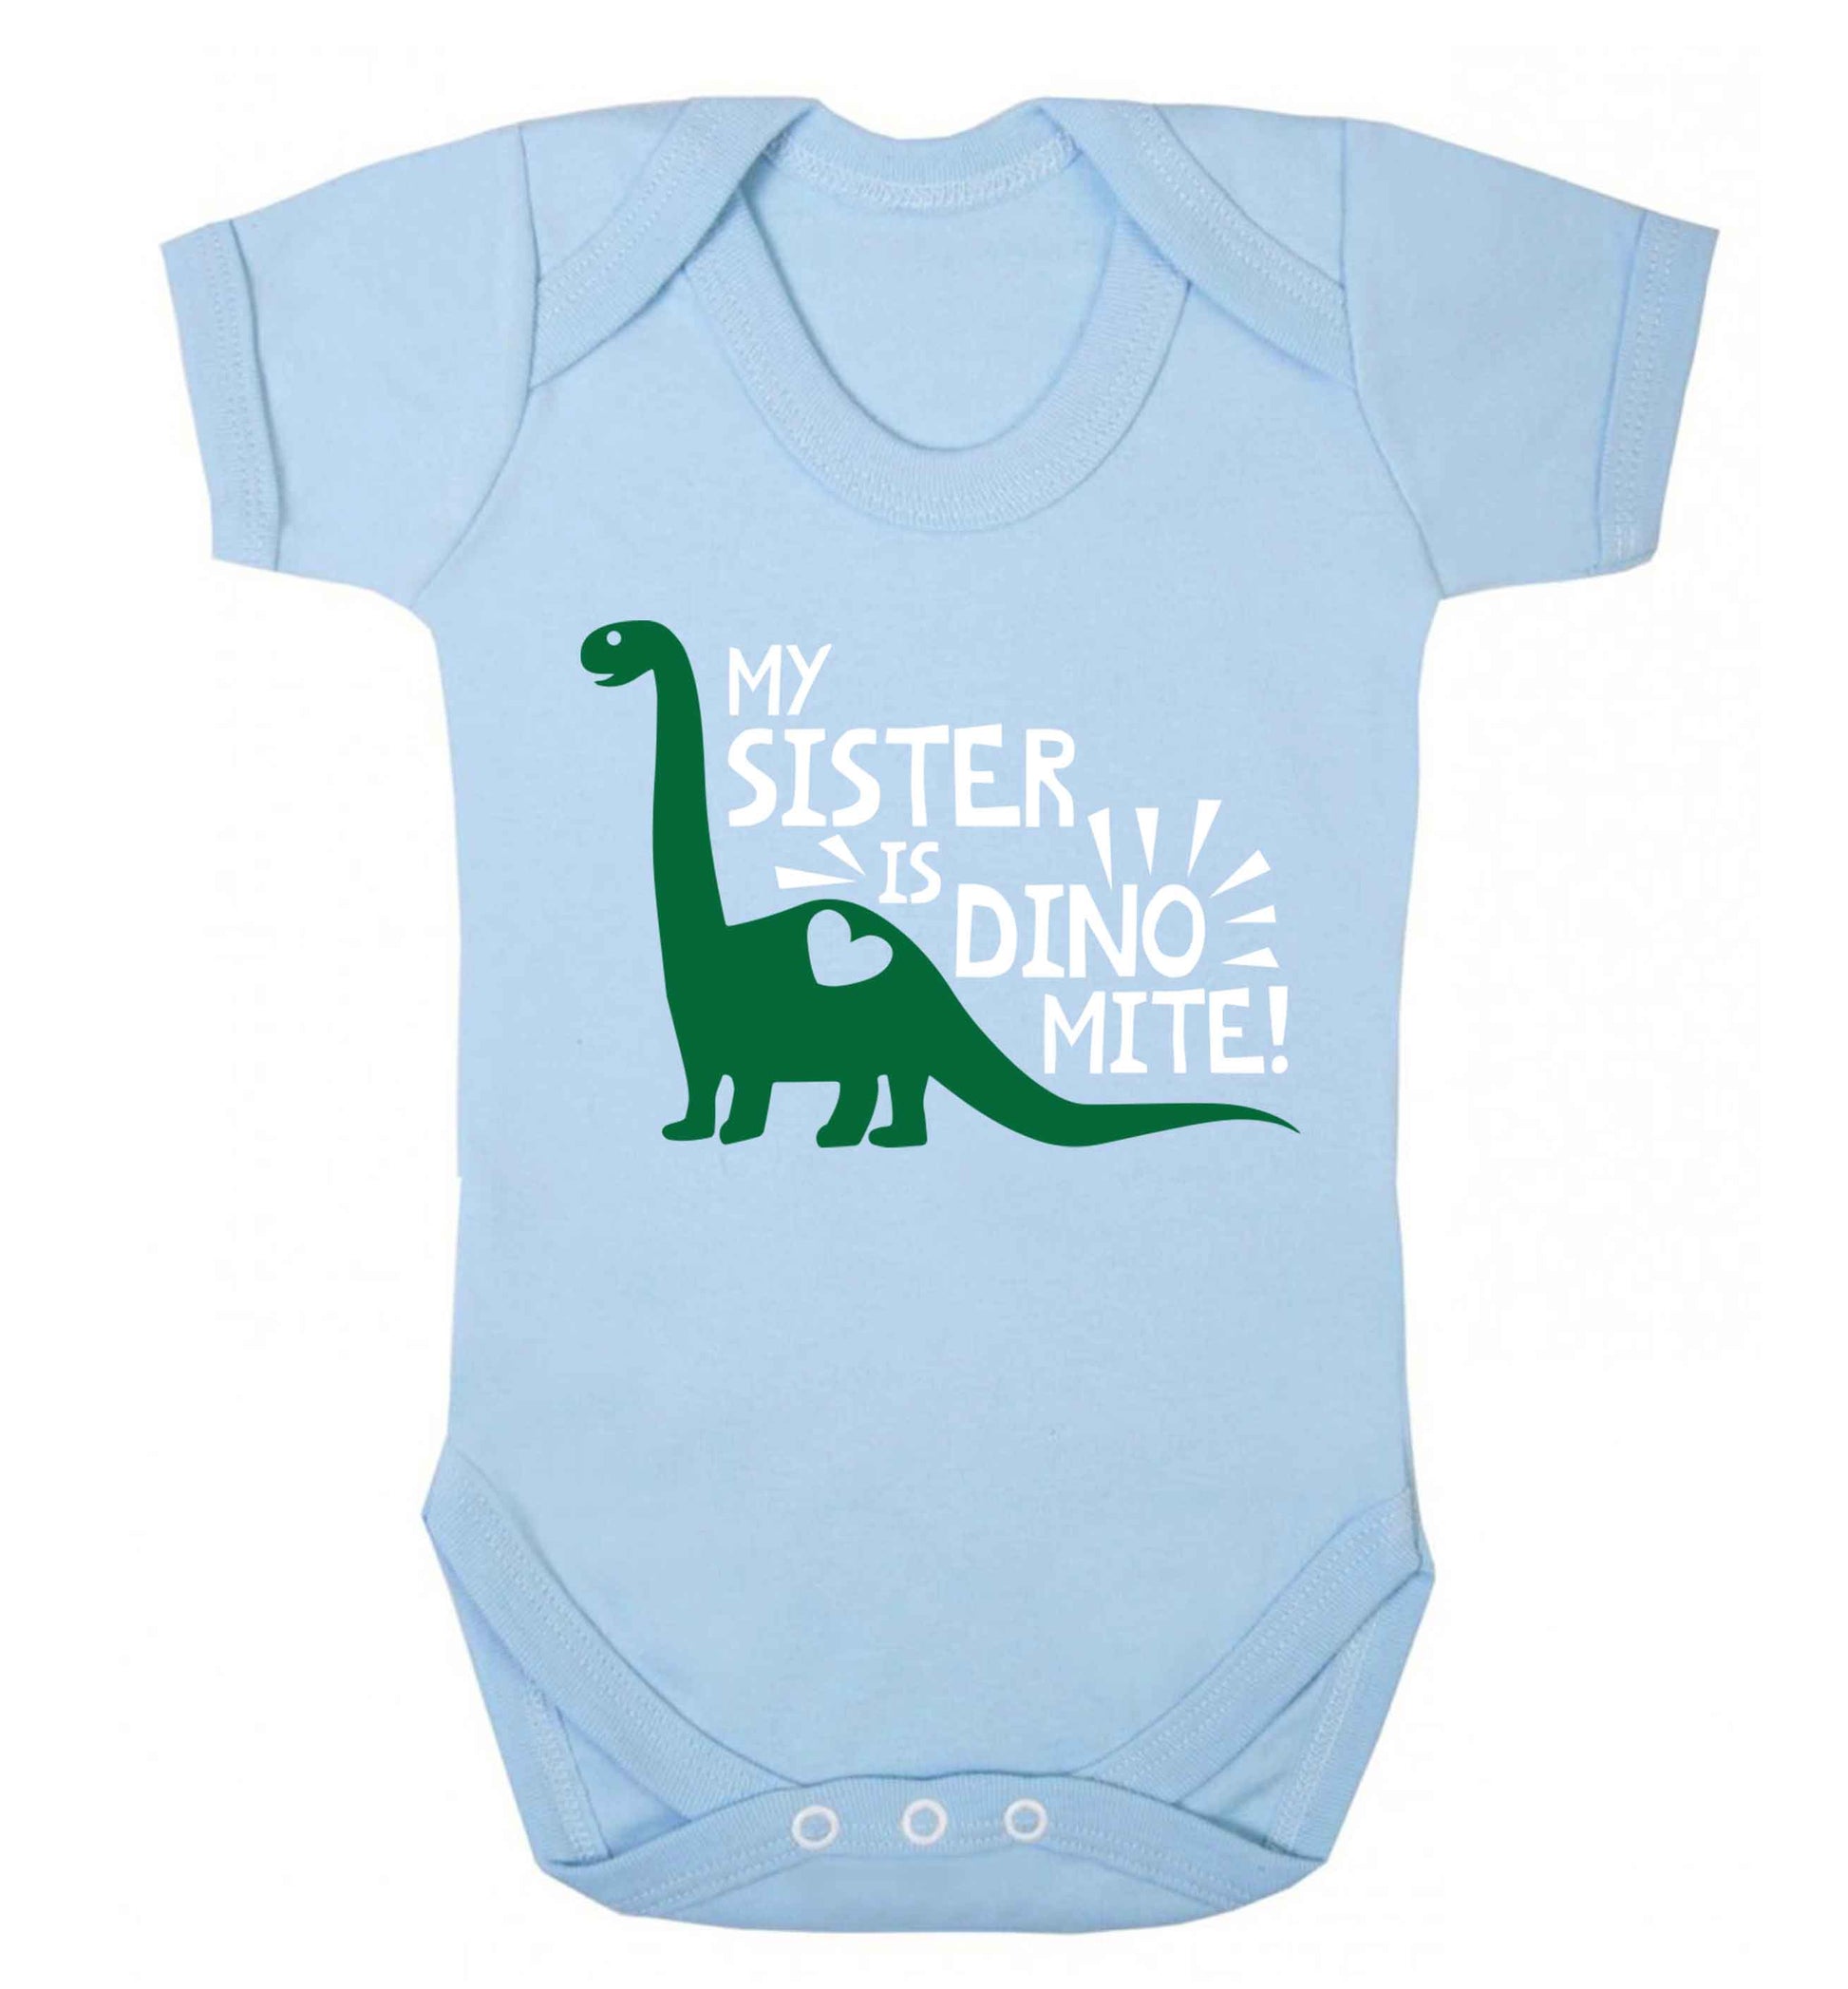 My sister is dinomite! Baby Vest pale blue 18-24 months